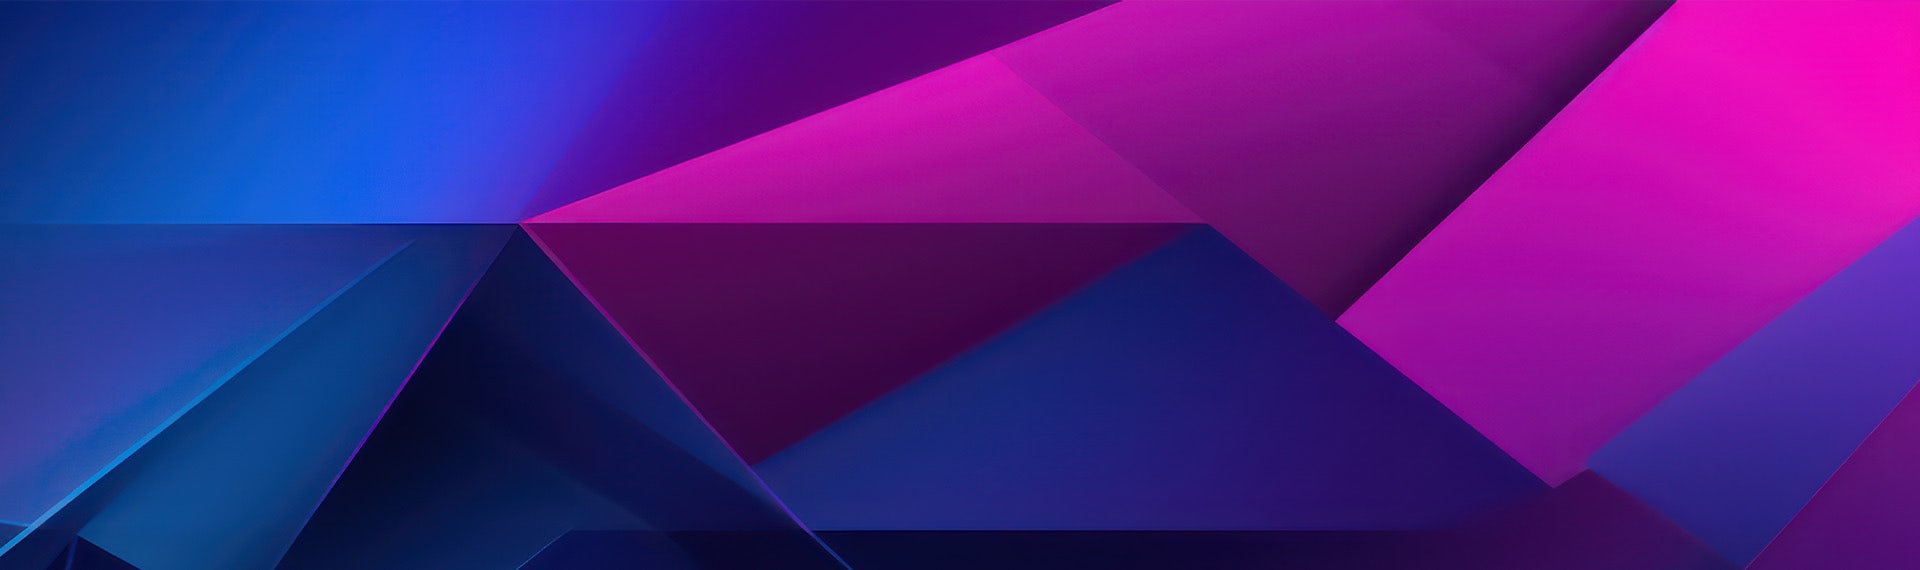 A blue and purple abstract background.